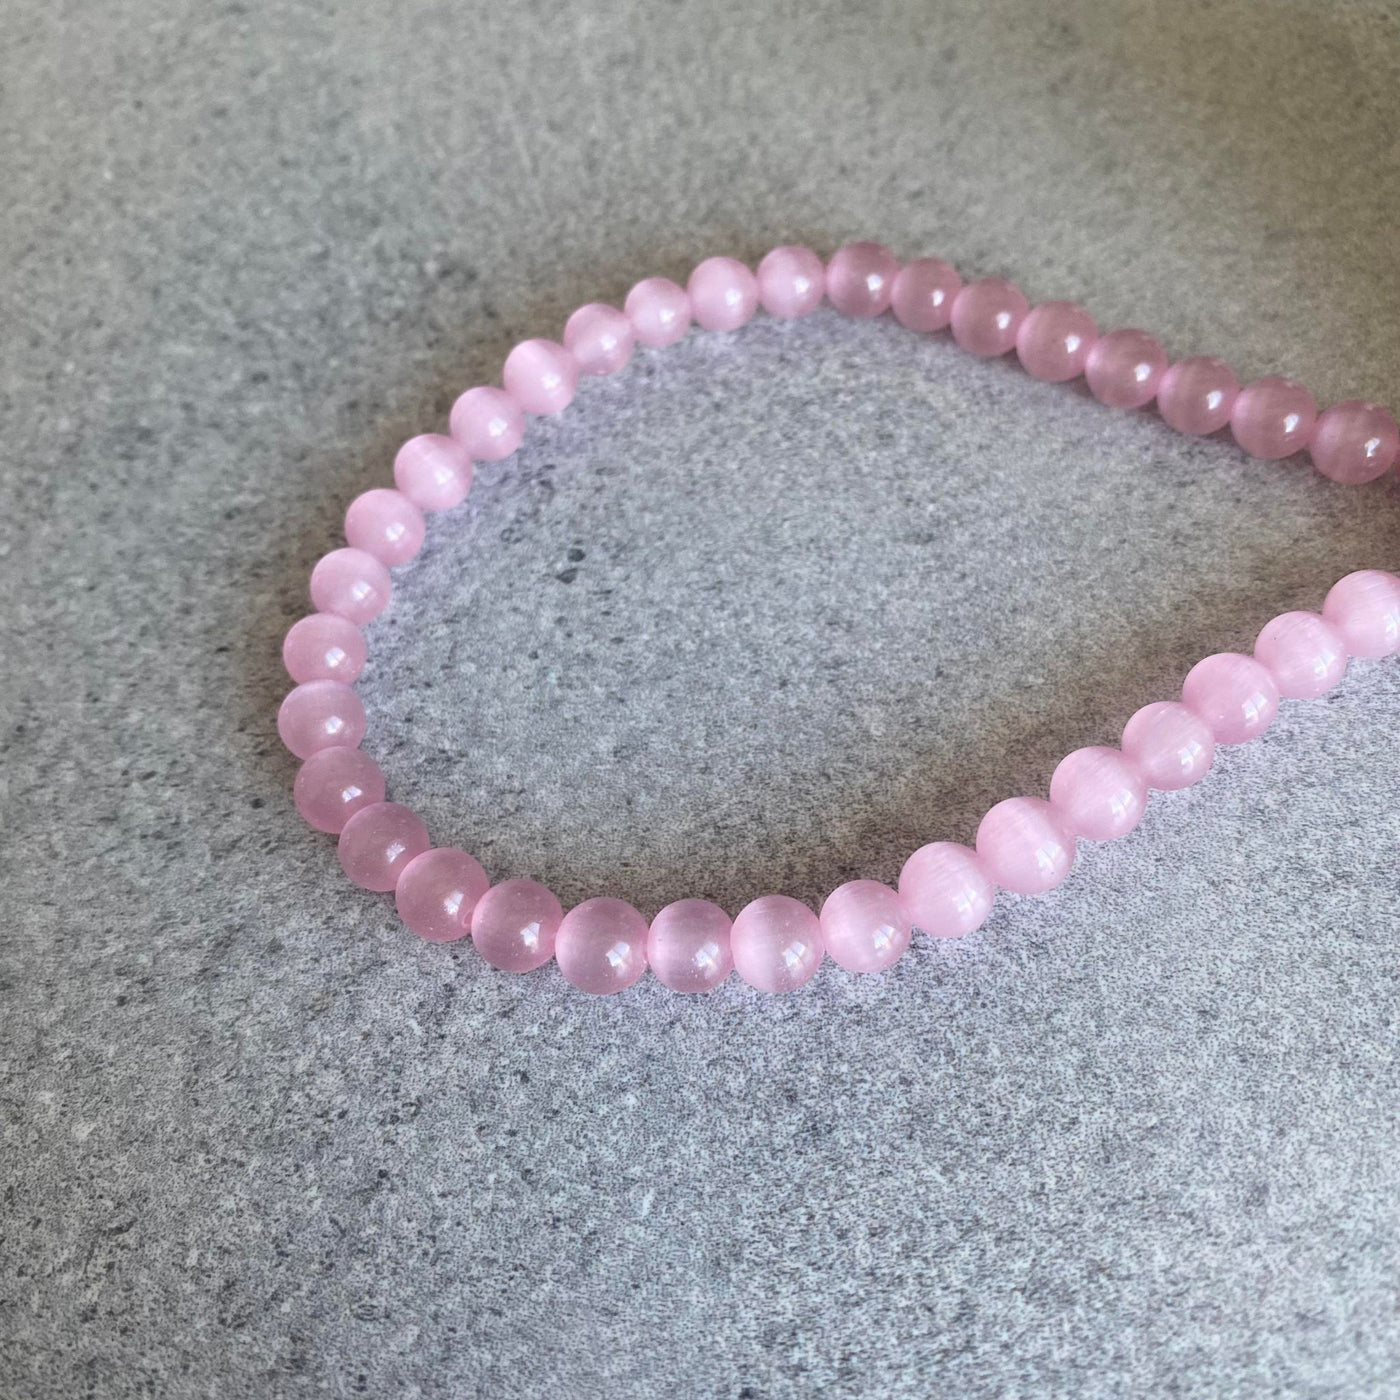 Pale pink cat's eye rope 8 mm